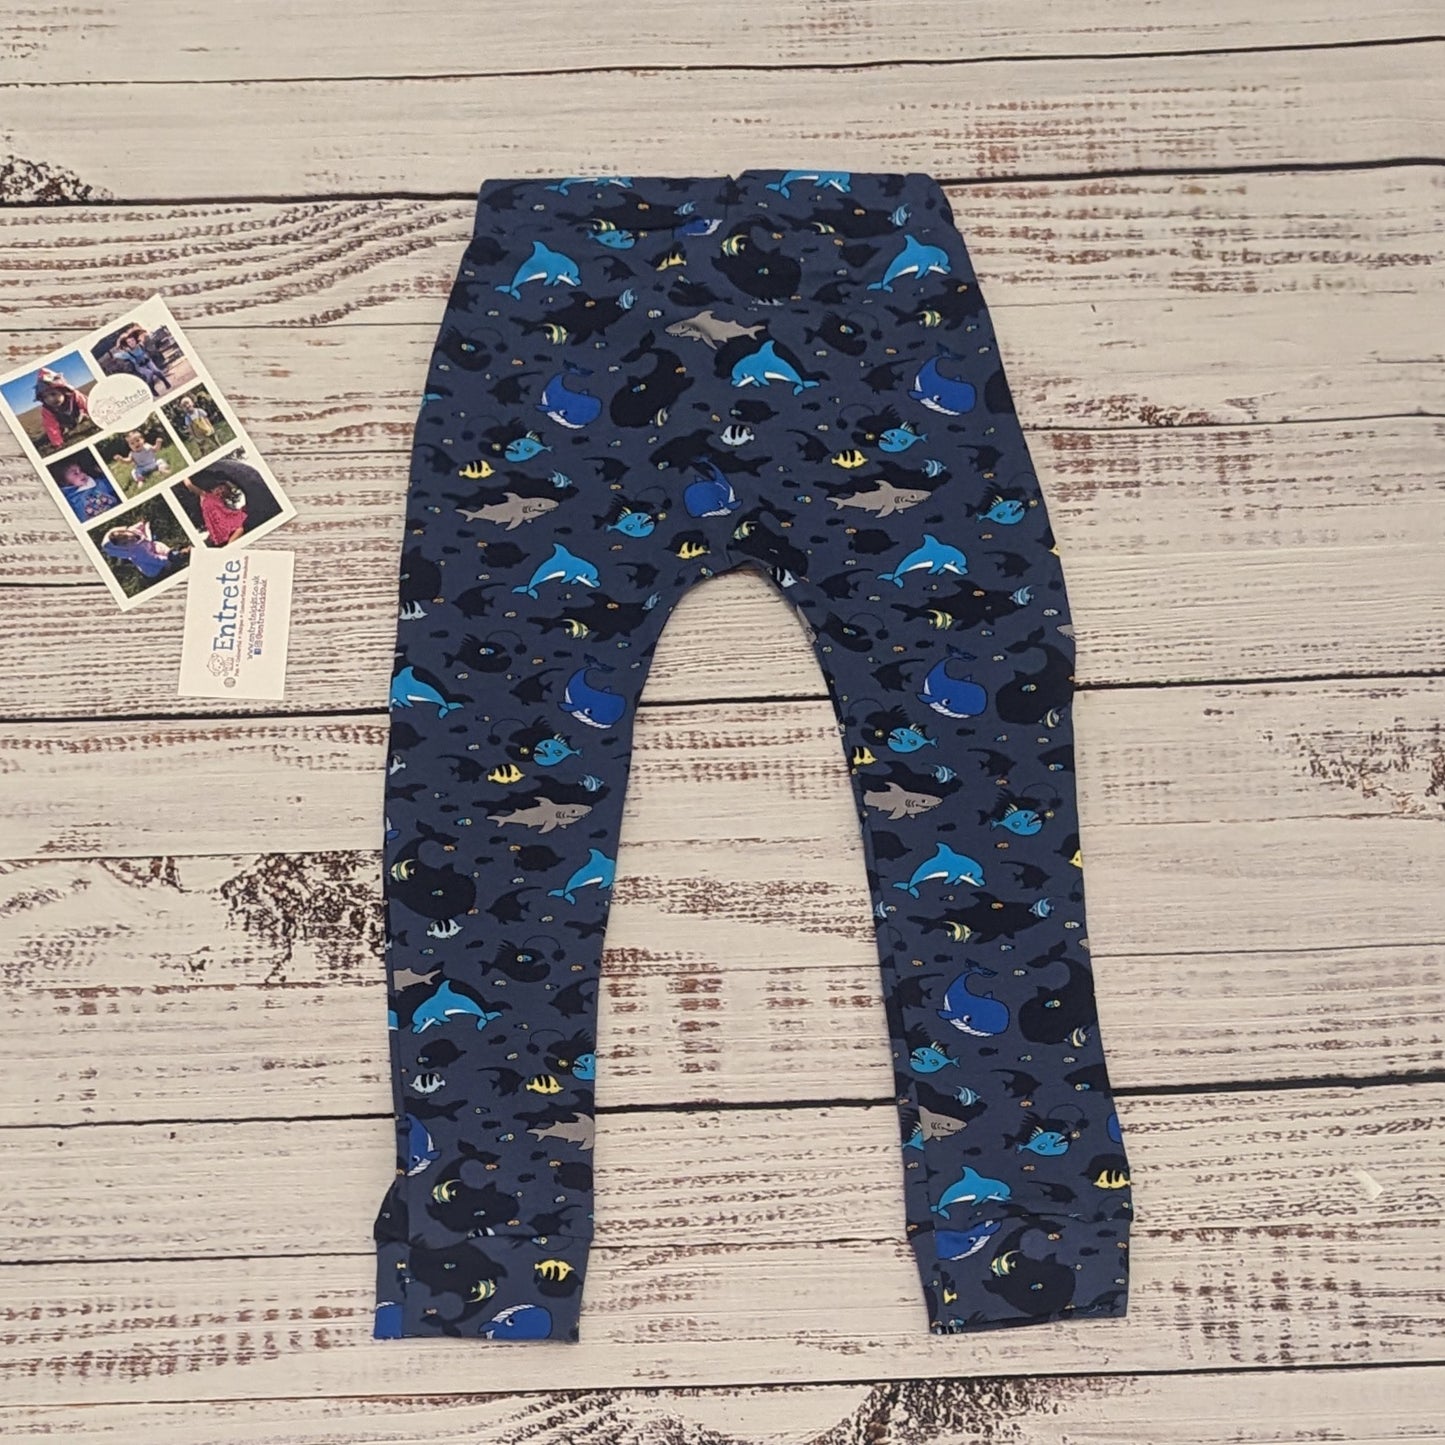 Kids navy sea creatures harem joggers. Handmade using navy sea life shadows cotton jersey. Shown from the rear.